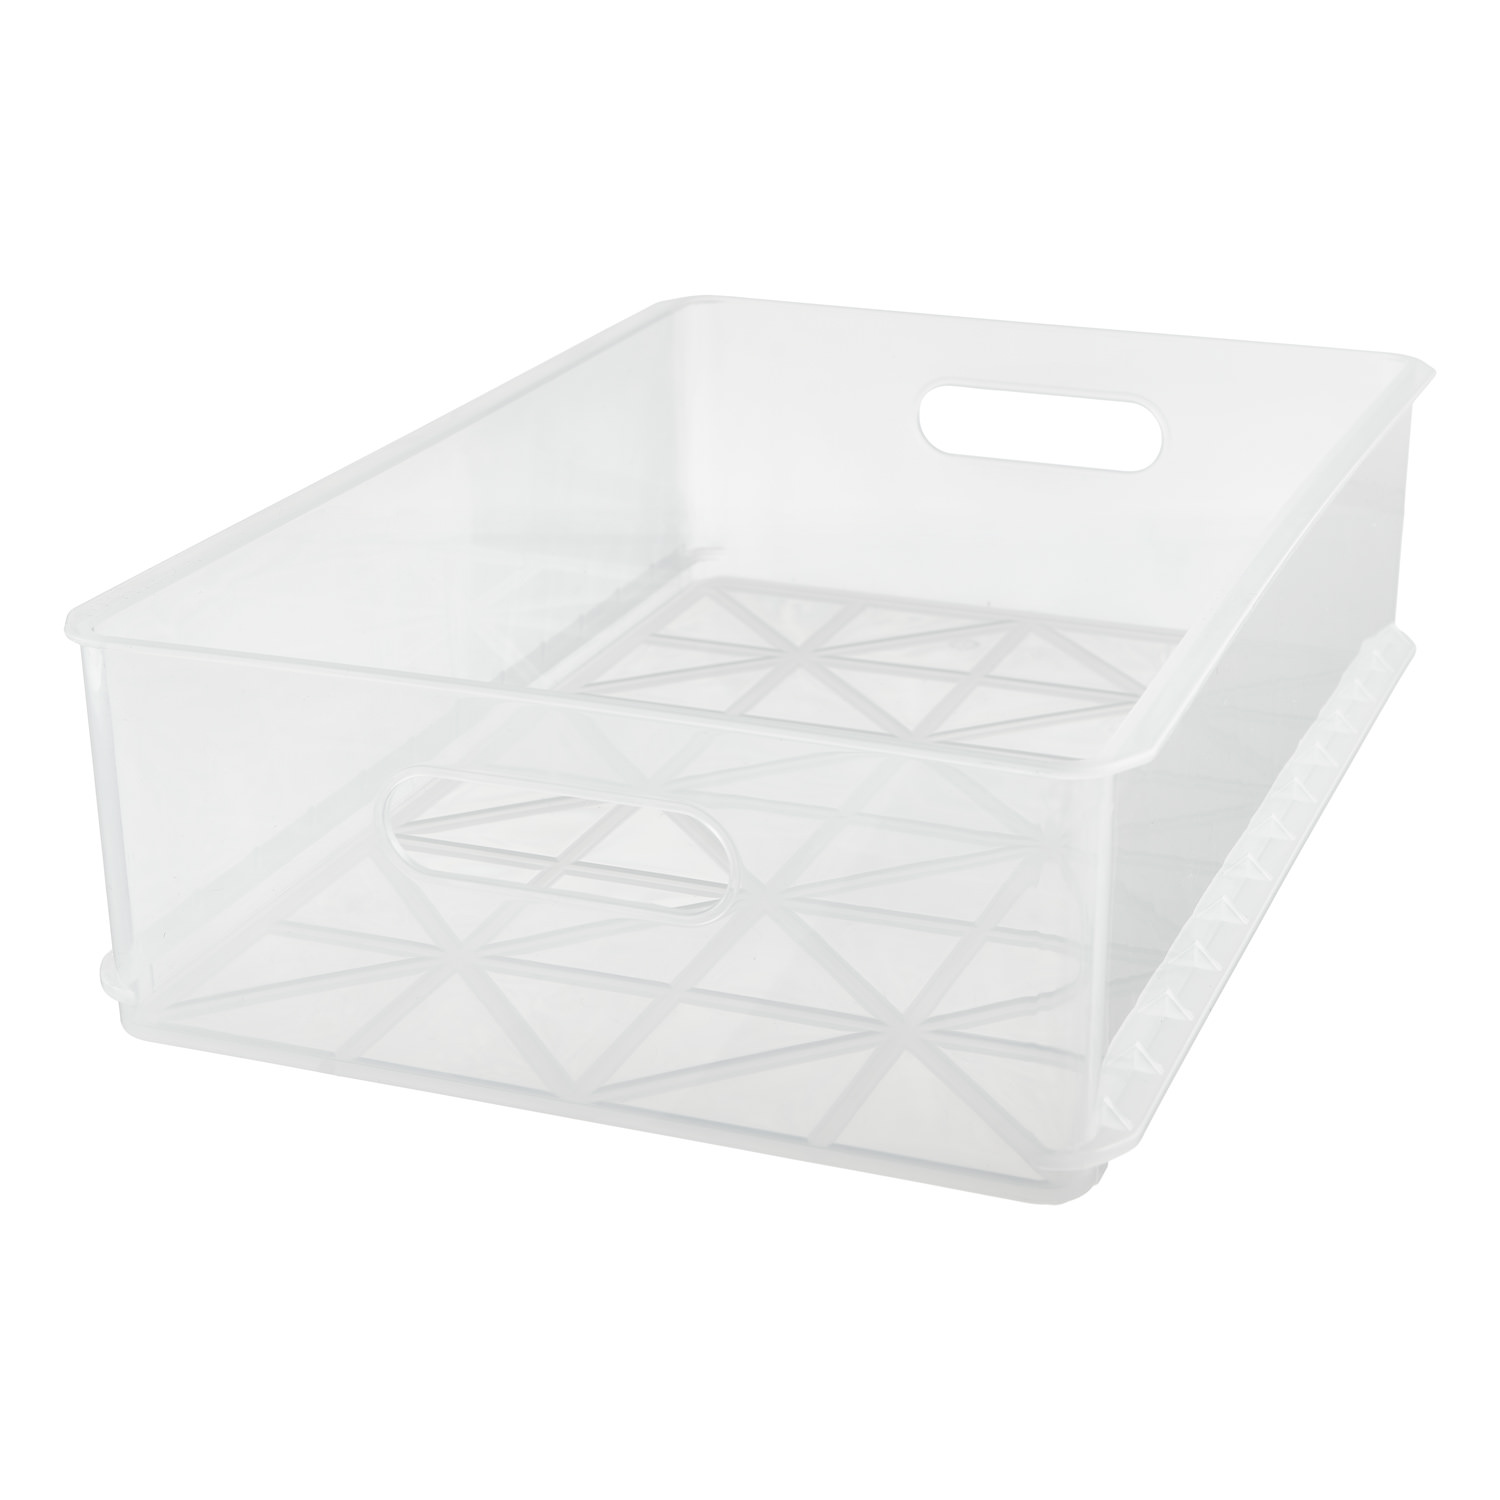 Plastic Drawer M for Airline Trolleys & Aviation Boxes KSSU